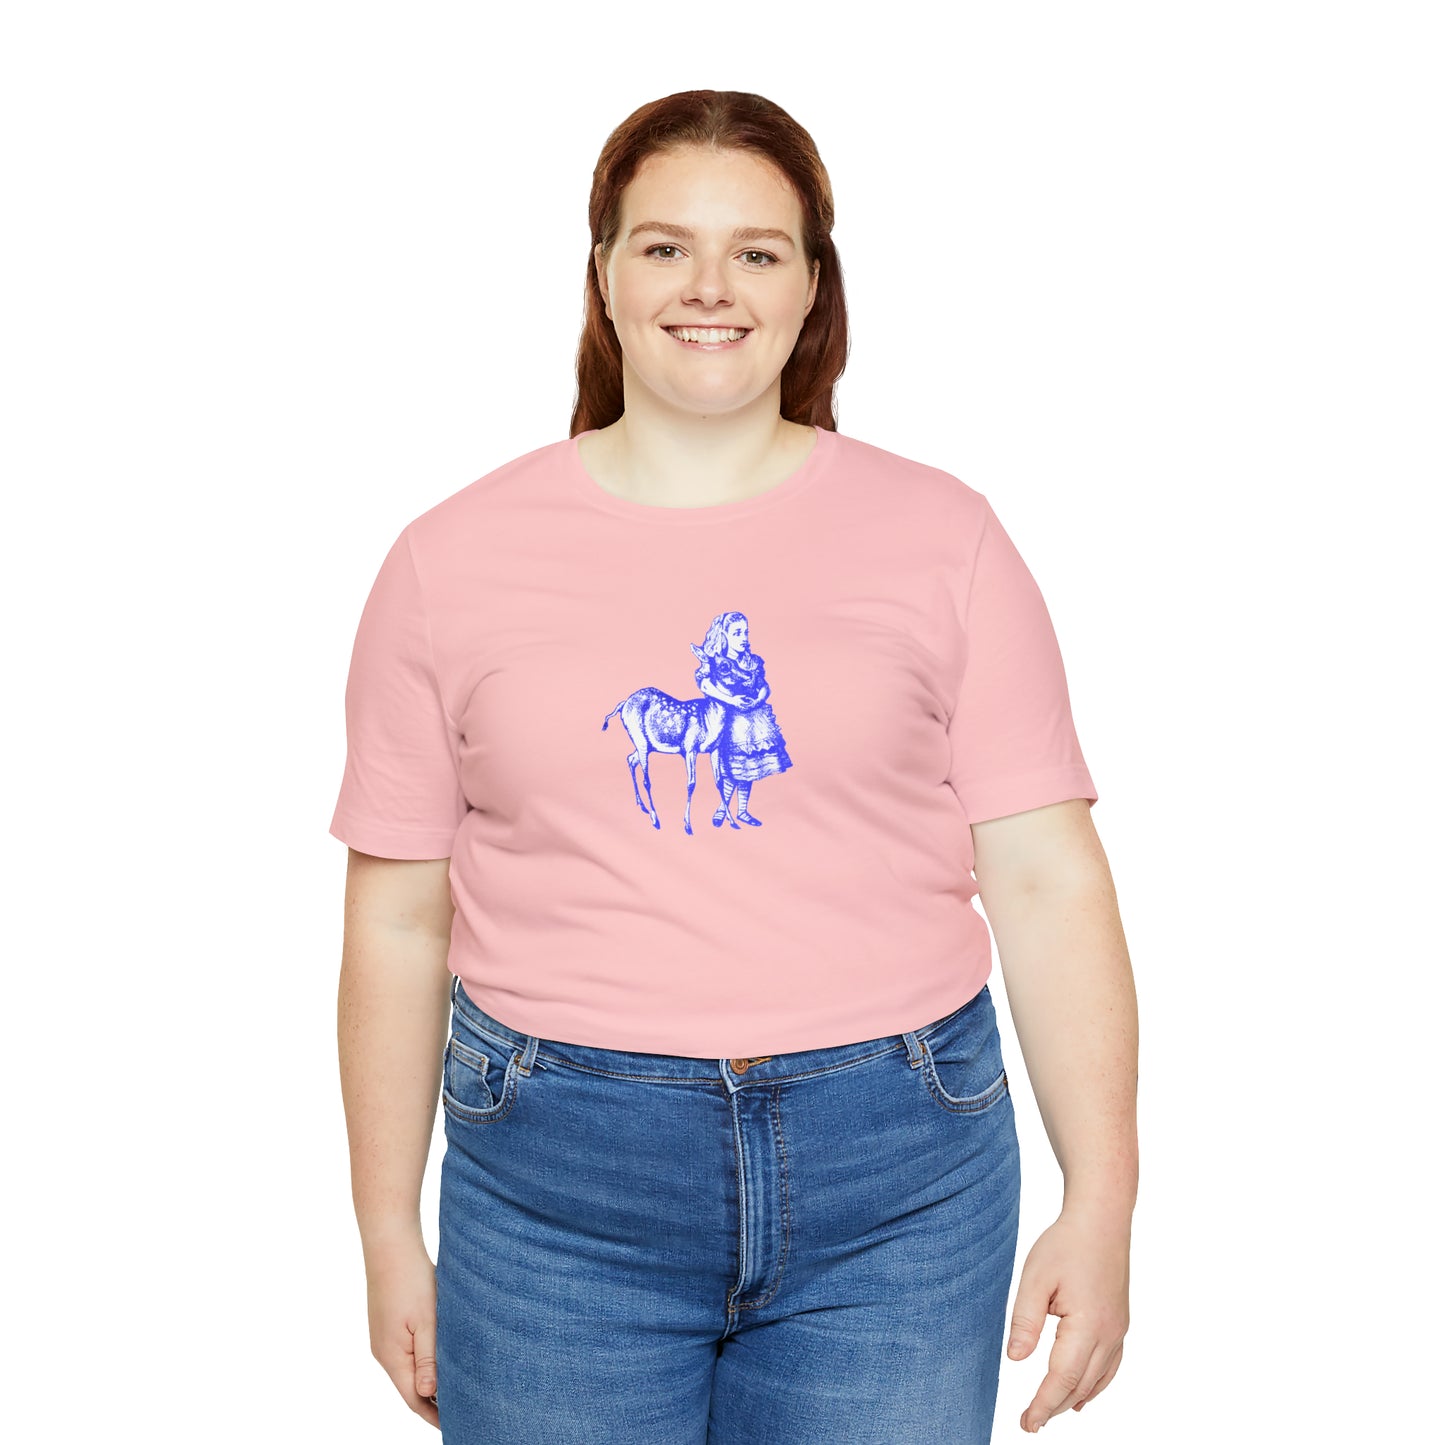 A smiling plus sized woman wearing a pink t-shirt with an illustration of Alice in Wonderland and a baby deer printed in blue.